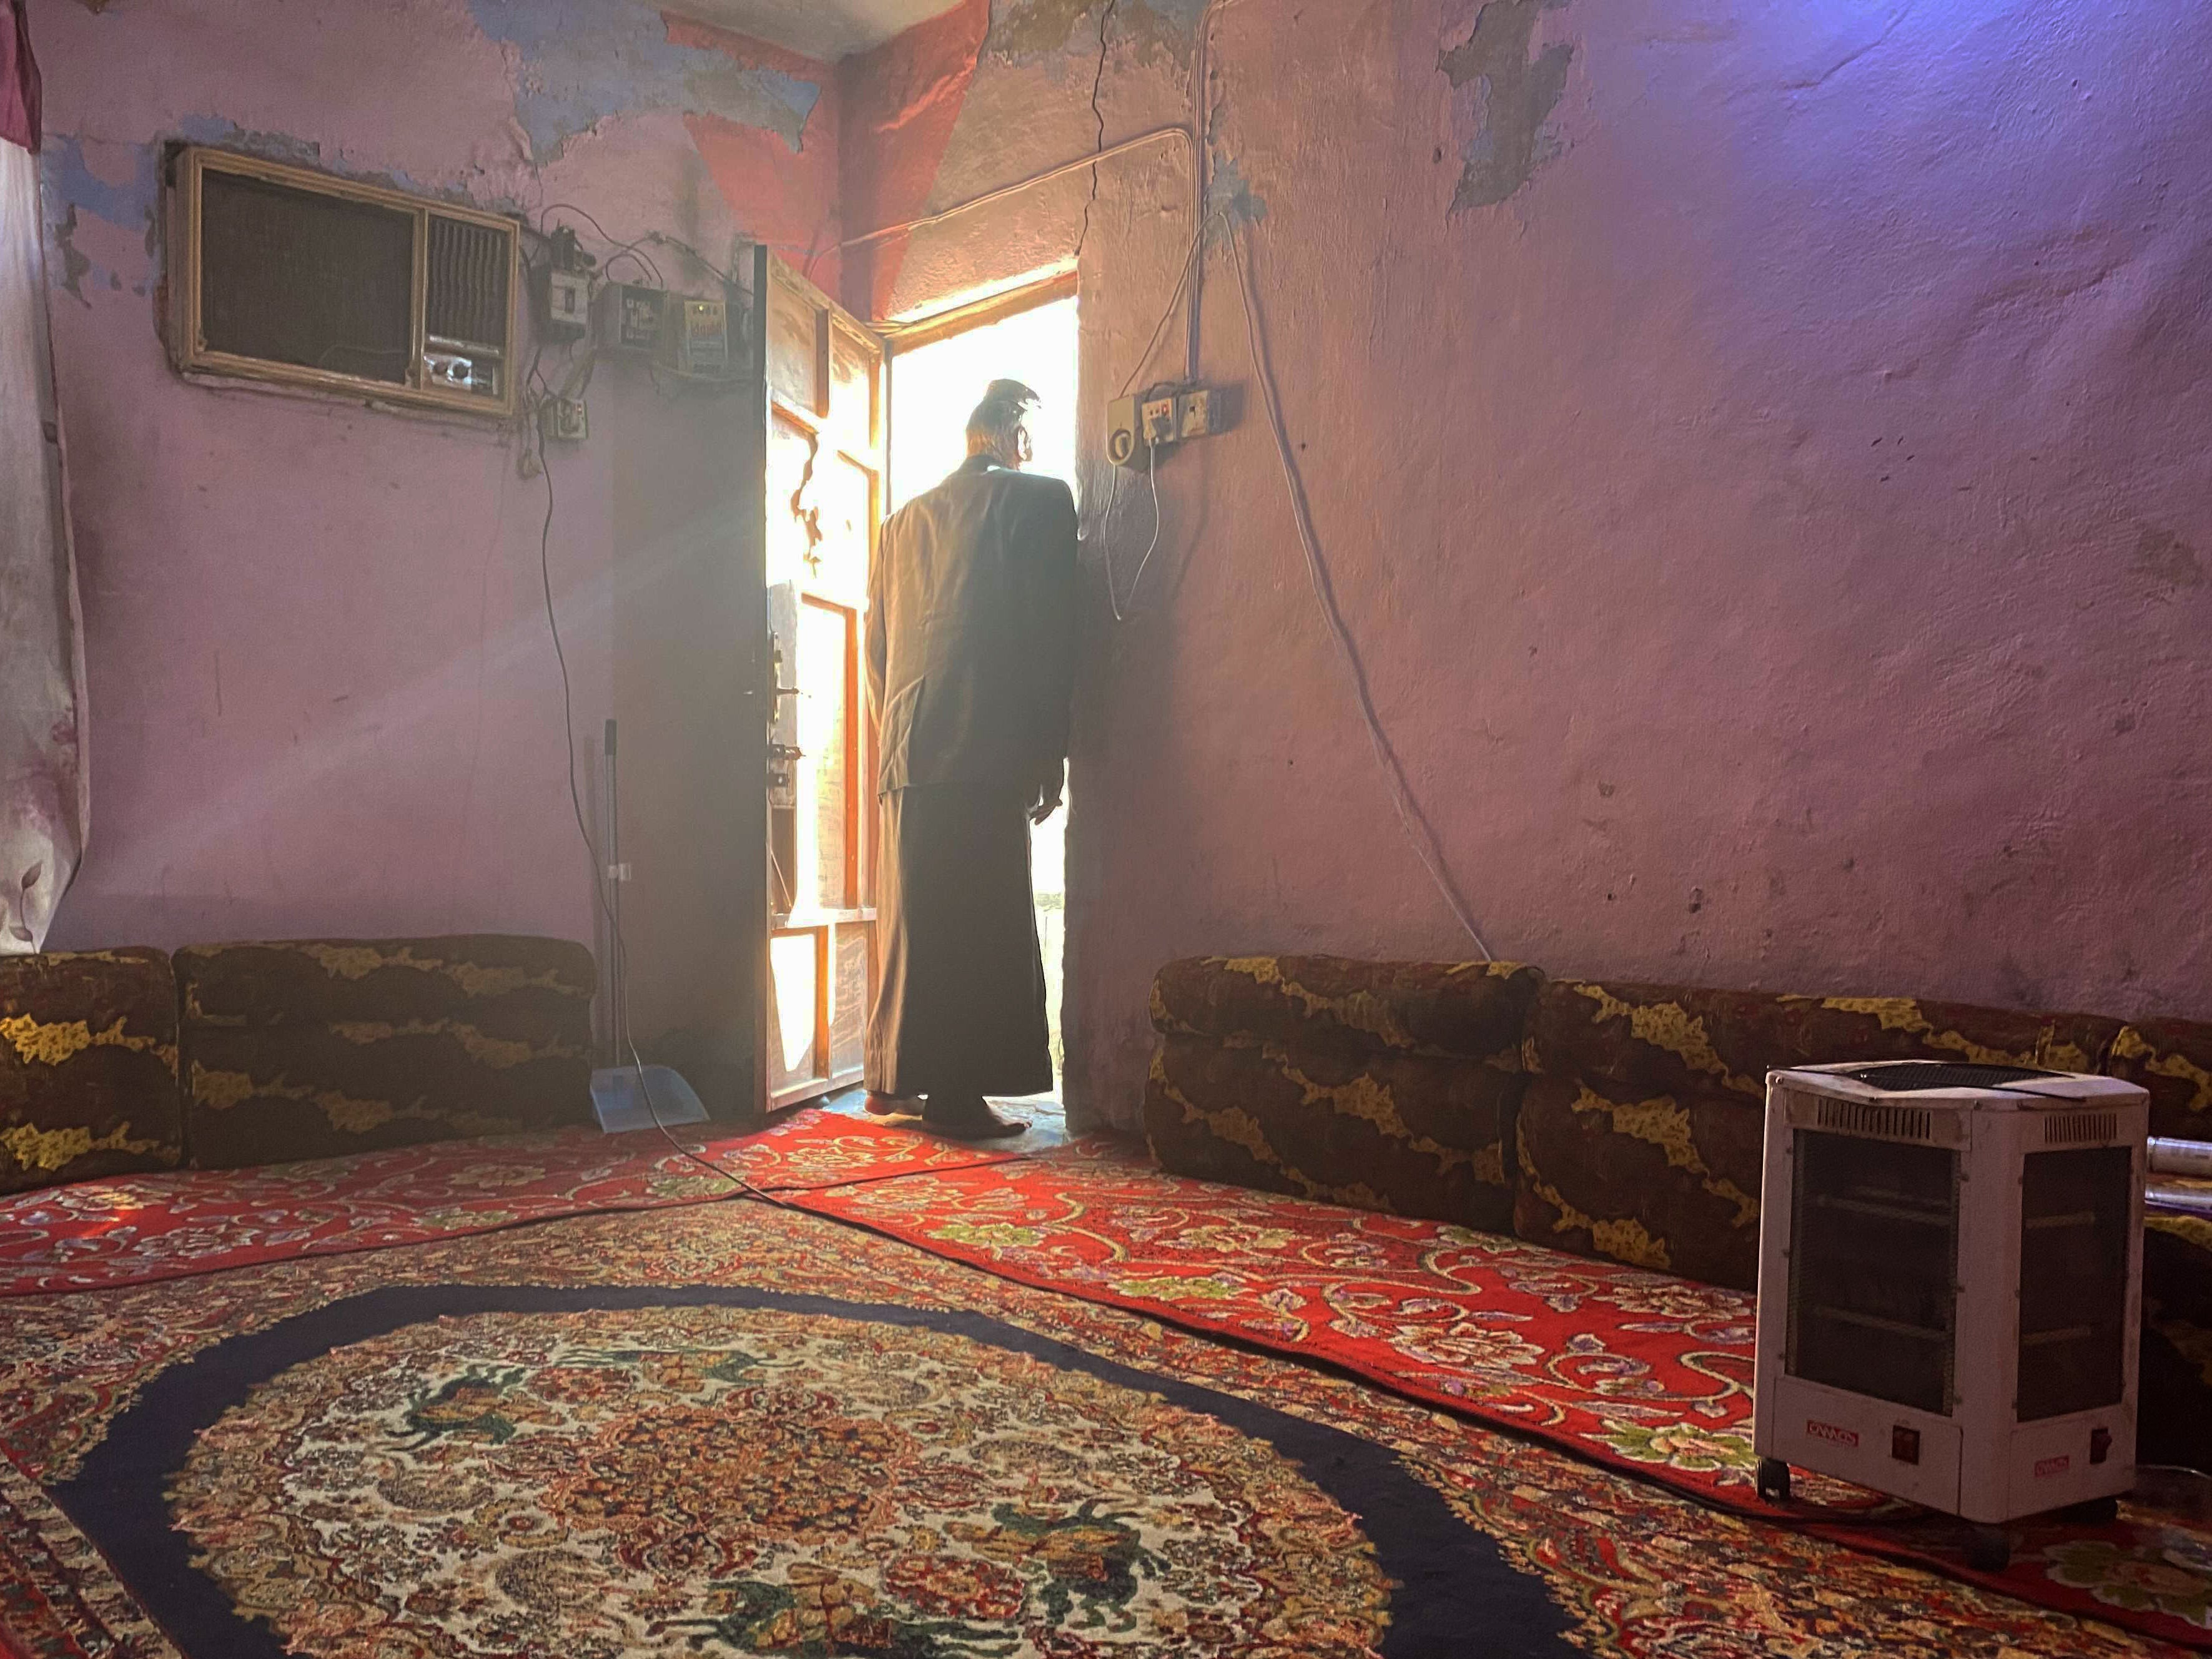 Abdullah, 58, in the door of his cramped family home. He had expected to be able to build a new house on land from the PMF when his brother died as a member of an Iraqi militia